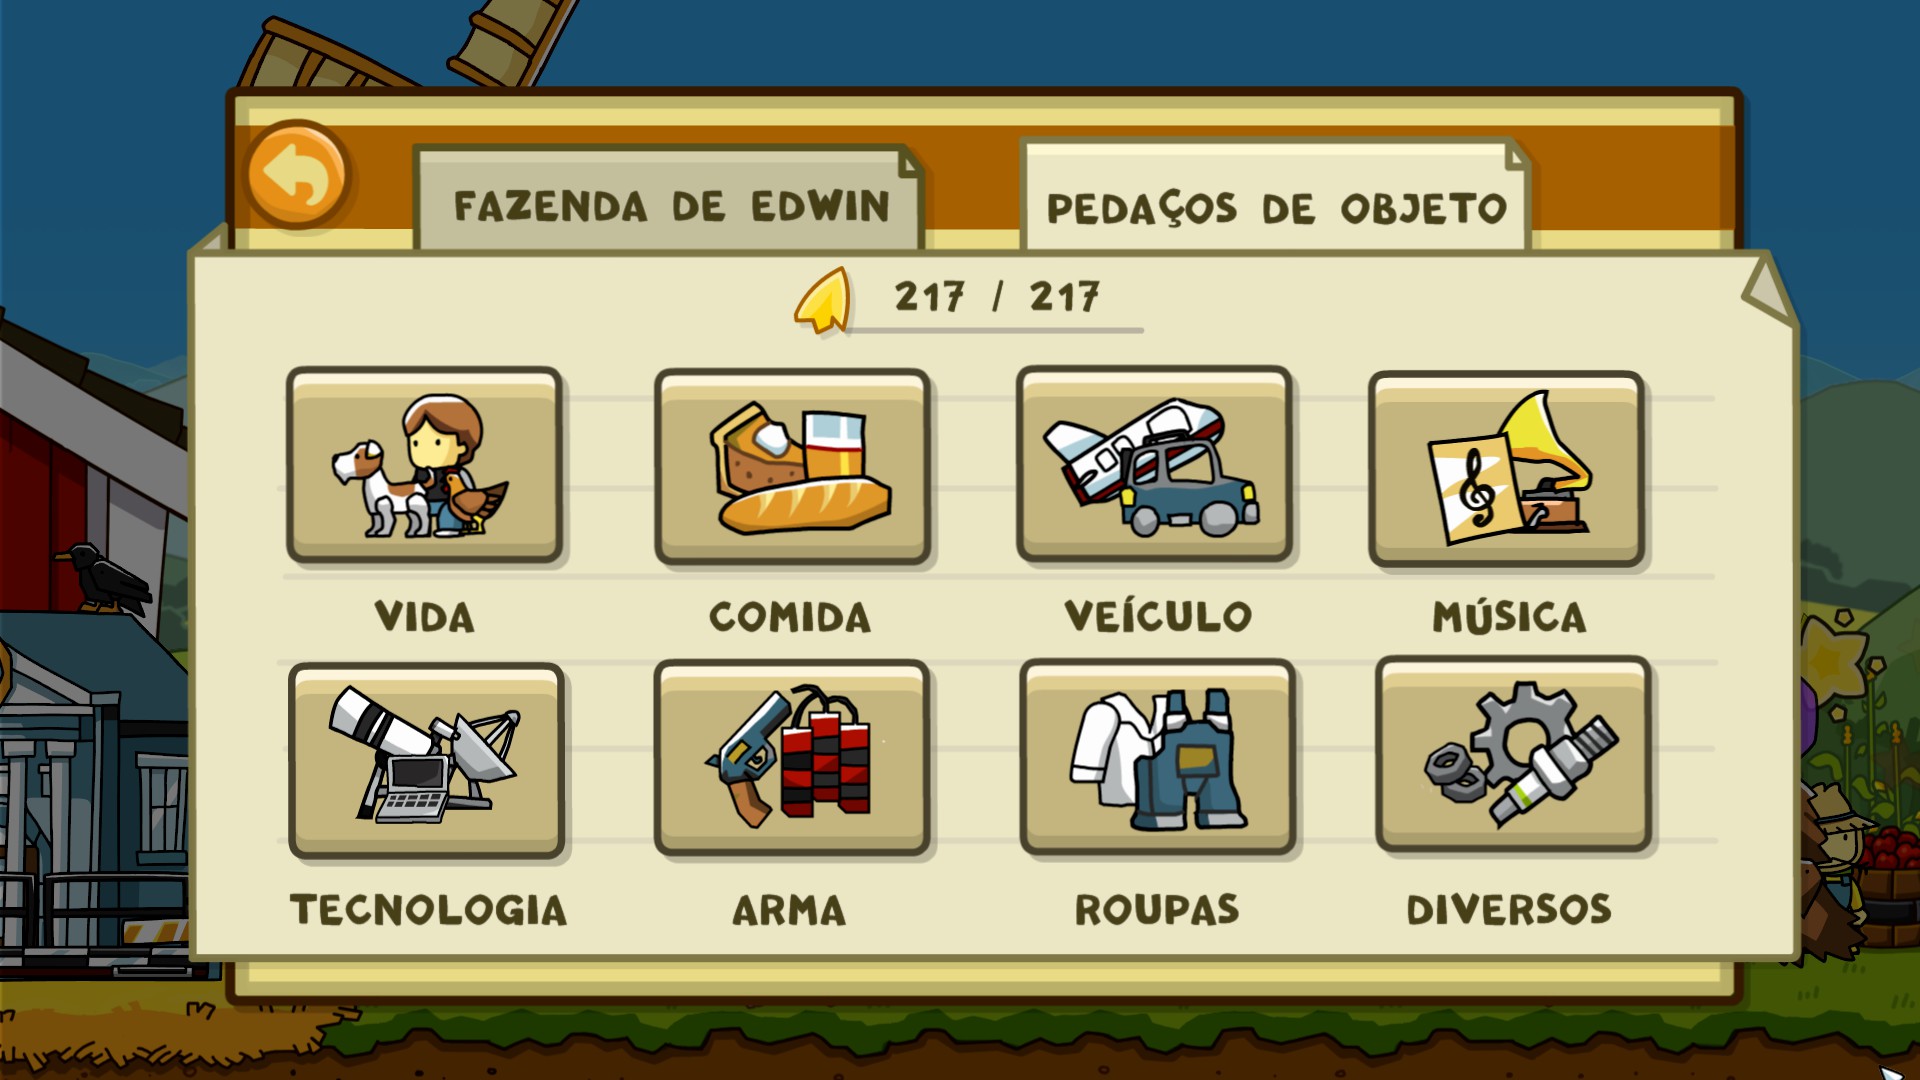 Steam Community :: Guide :: Scribblenauts Unlimited - GUIA COMPLETO (PT-BR)